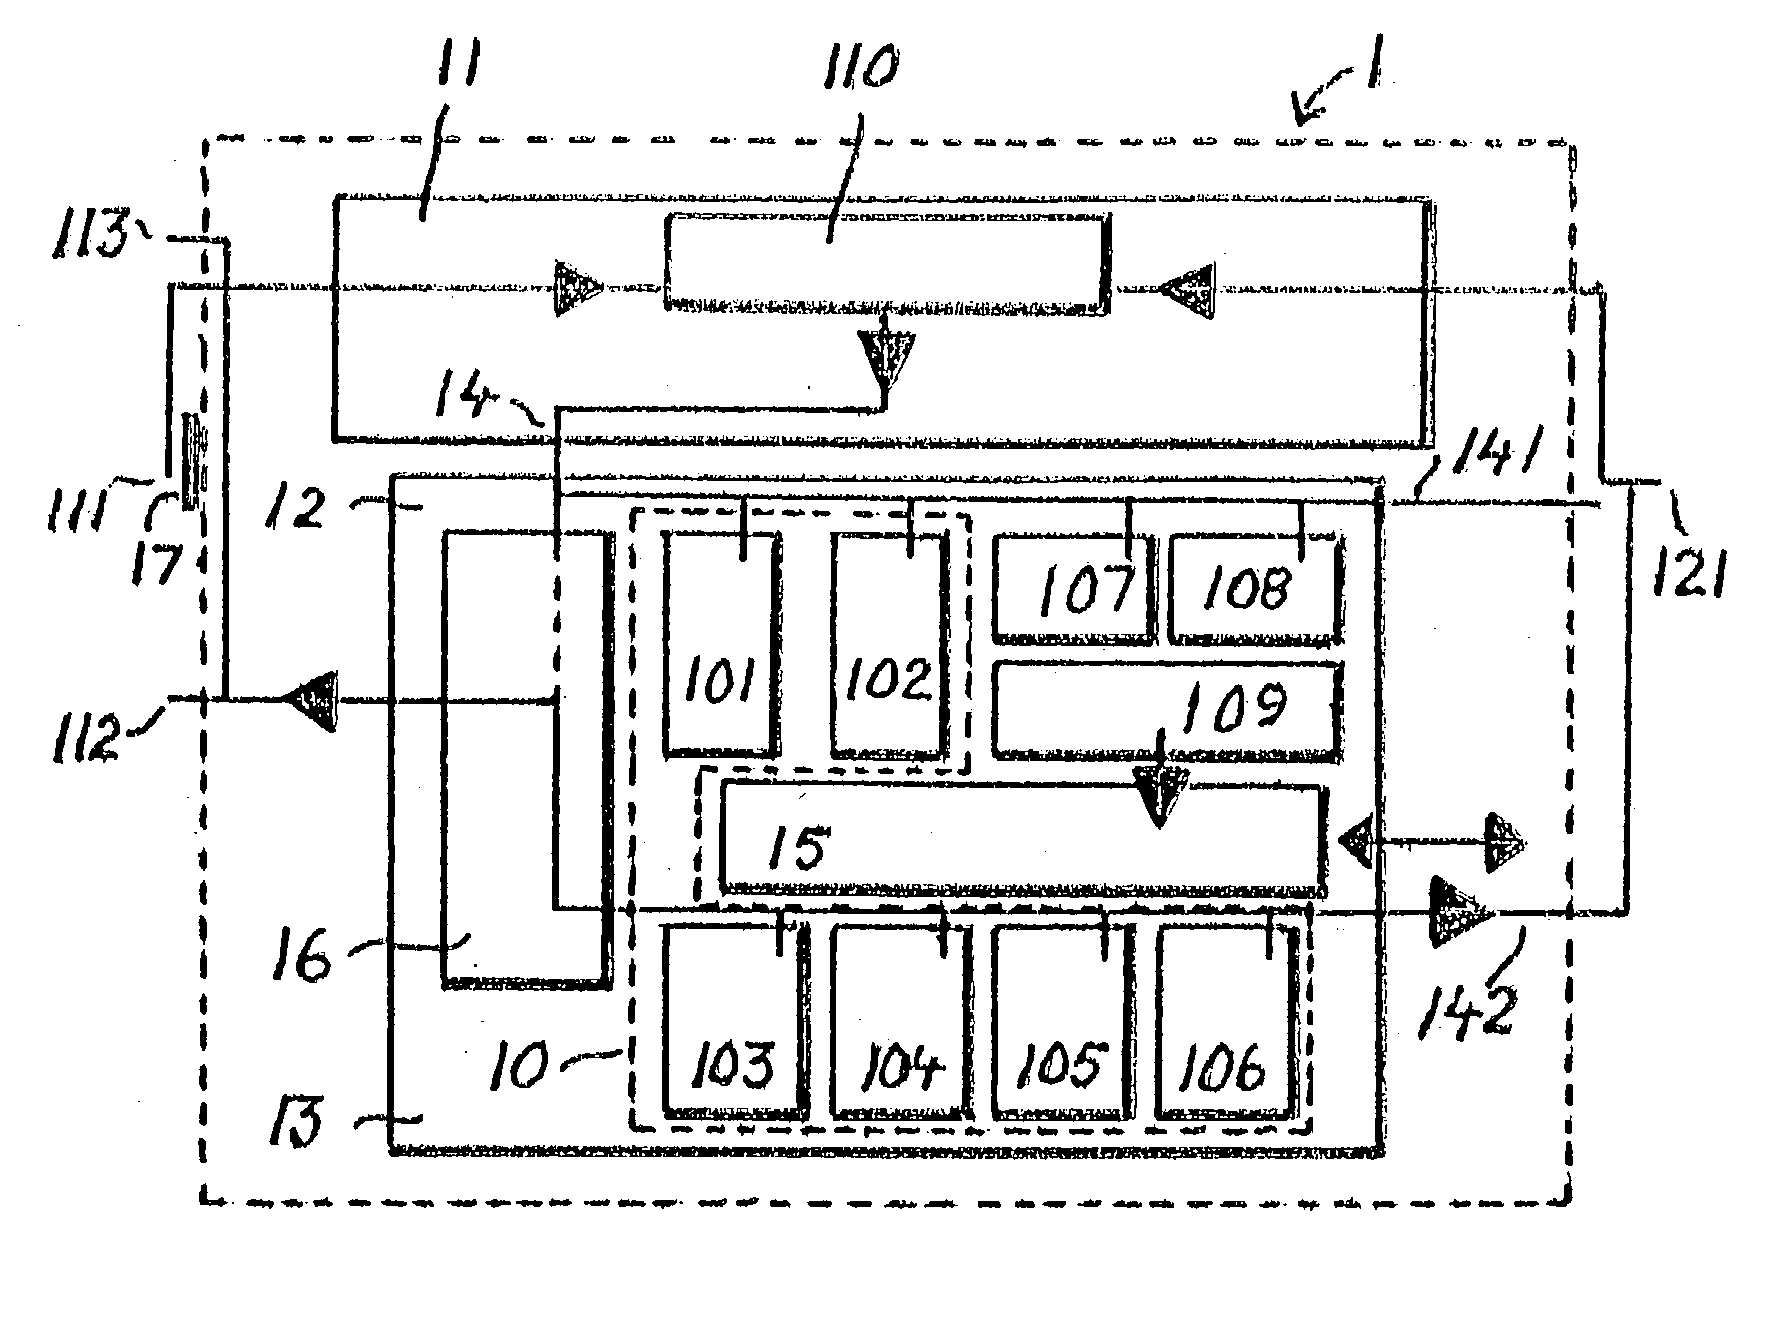 Arrangement of banknote handling machines for the infeed and outfeed of banknotes